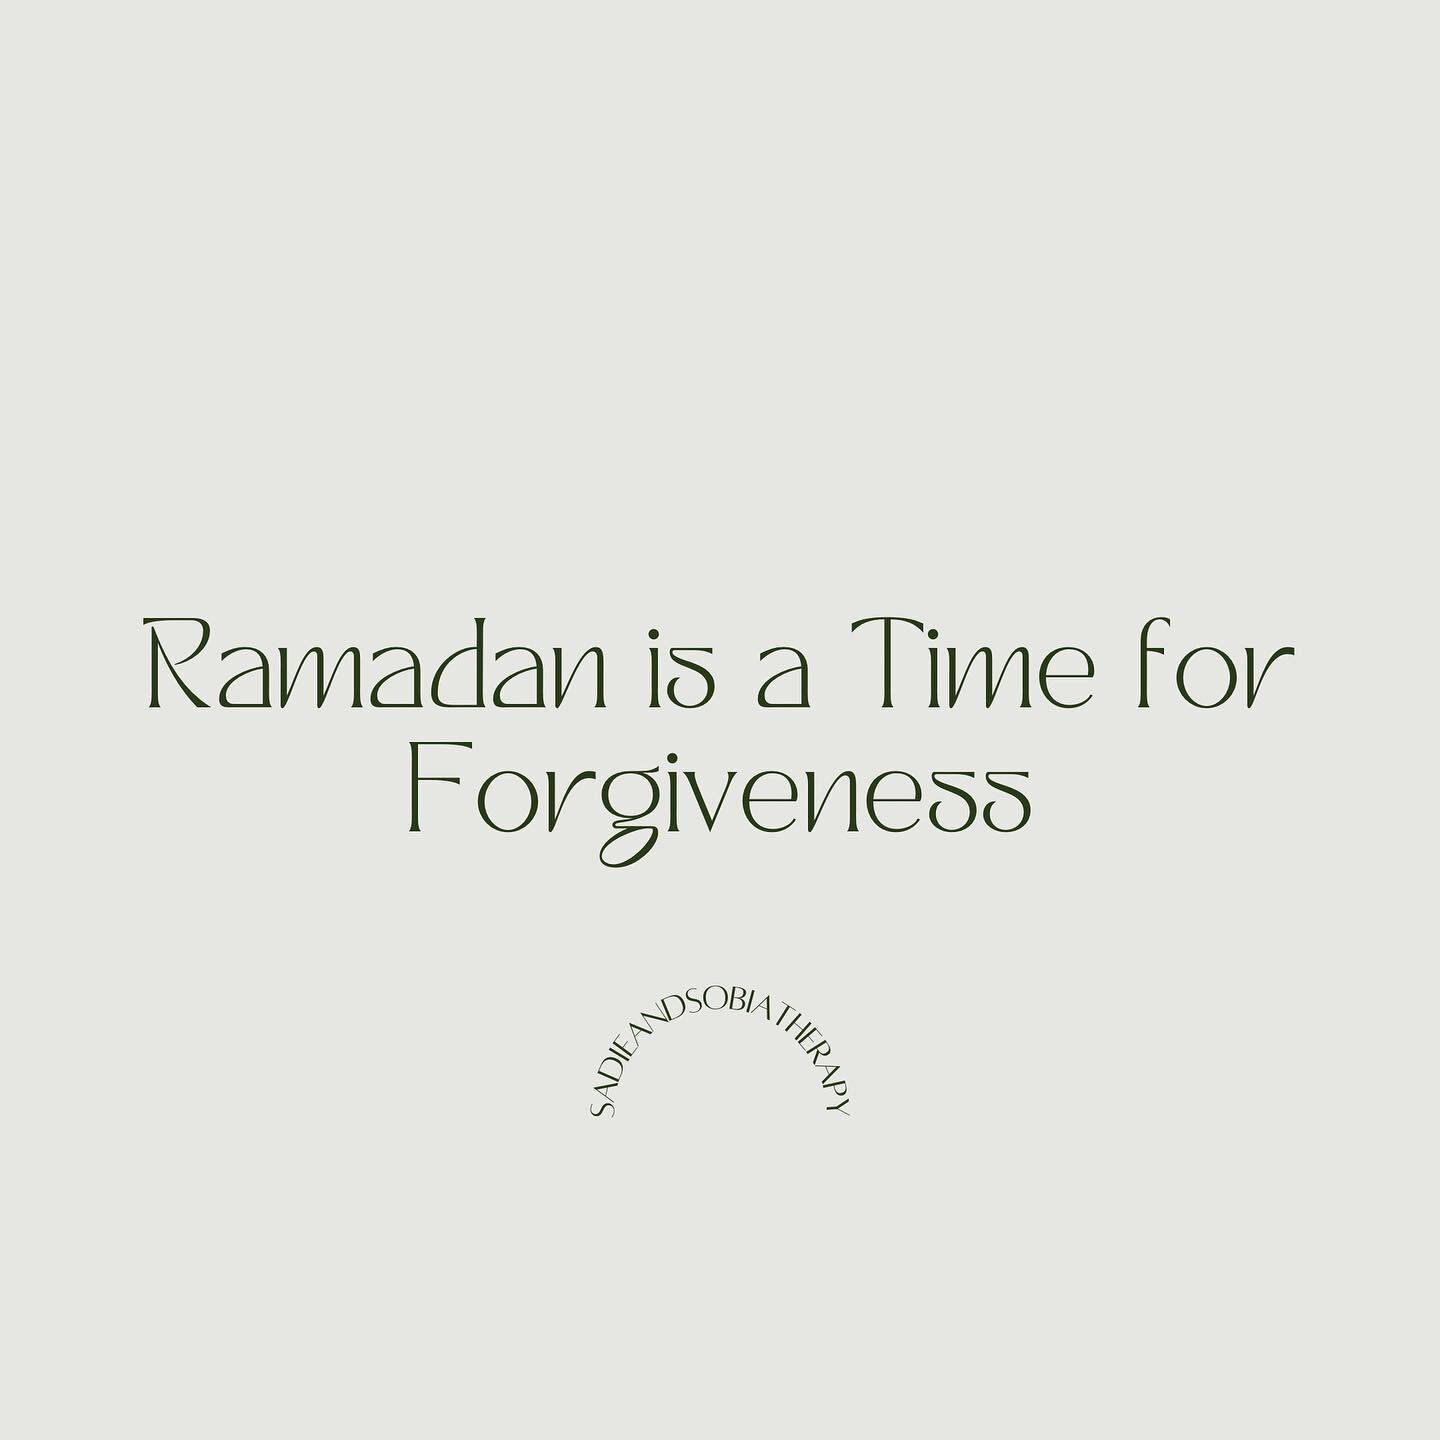 With Ramadan coming to an end, consider what you gift you can give yourself this Ramadan--perhaps a little forgiveness? 💞